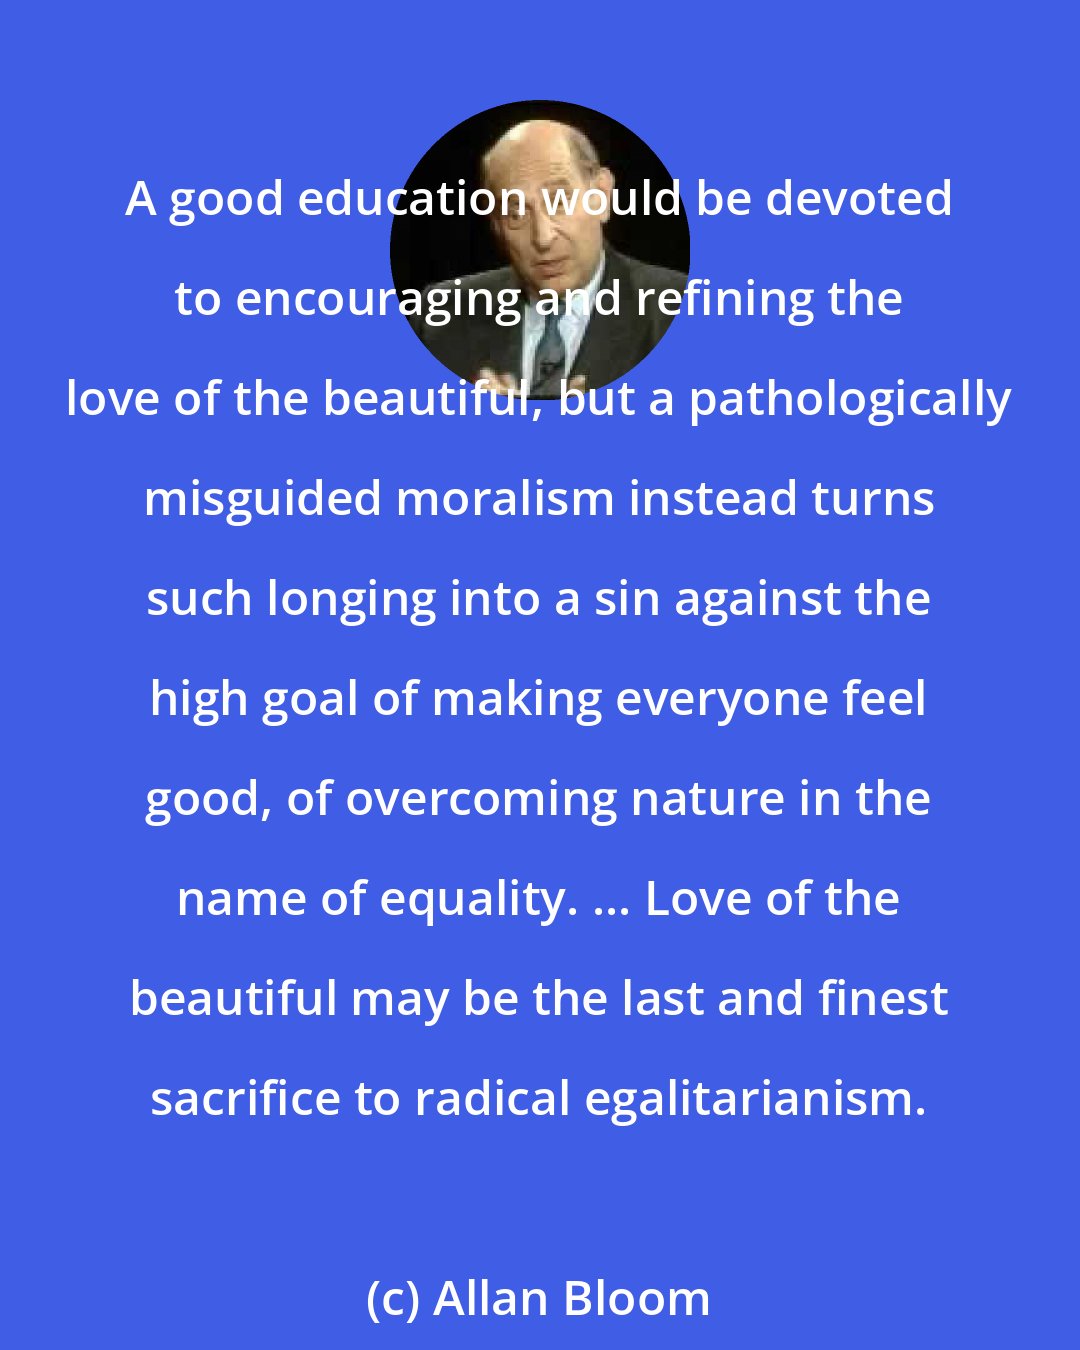 Allan Bloom: A good education would be devoted to encouraging and refining the love of the beautiful, but a pathologically misguided moralism instead turns such longing into a sin against the high goal of making everyone feel good, of overcoming nature in the name of equality. ... Love of the beautiful may be the last and finest sacrifice to radical egalitarianism.